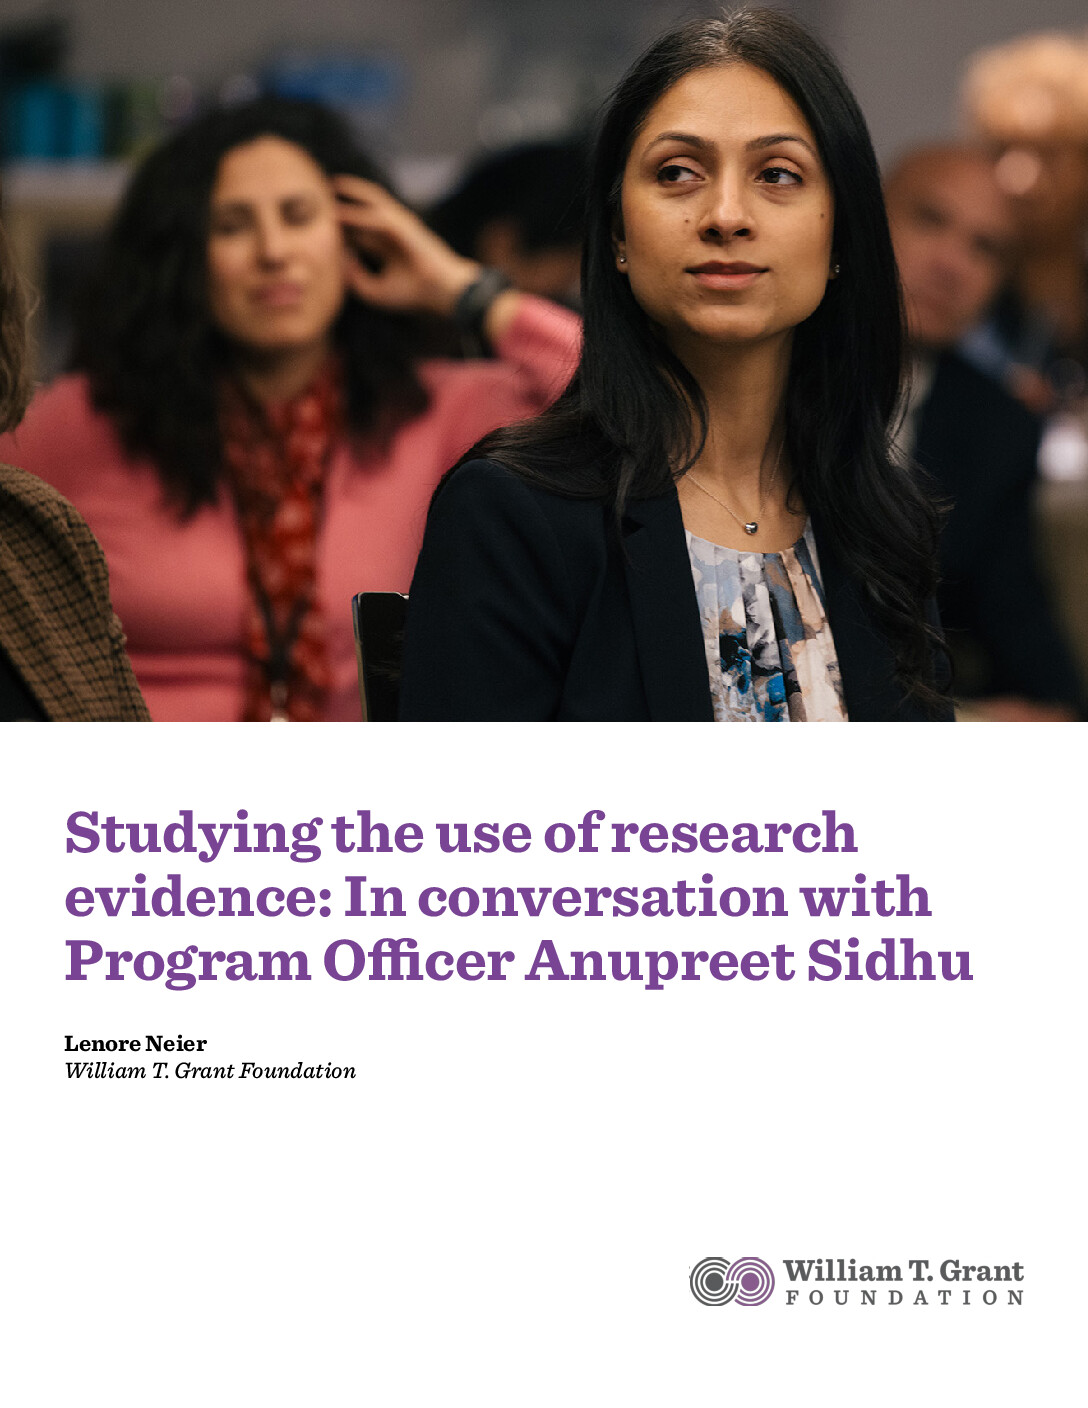 Studying the use of research evidence: In conversation with Program Officer Anupreet Sidhu